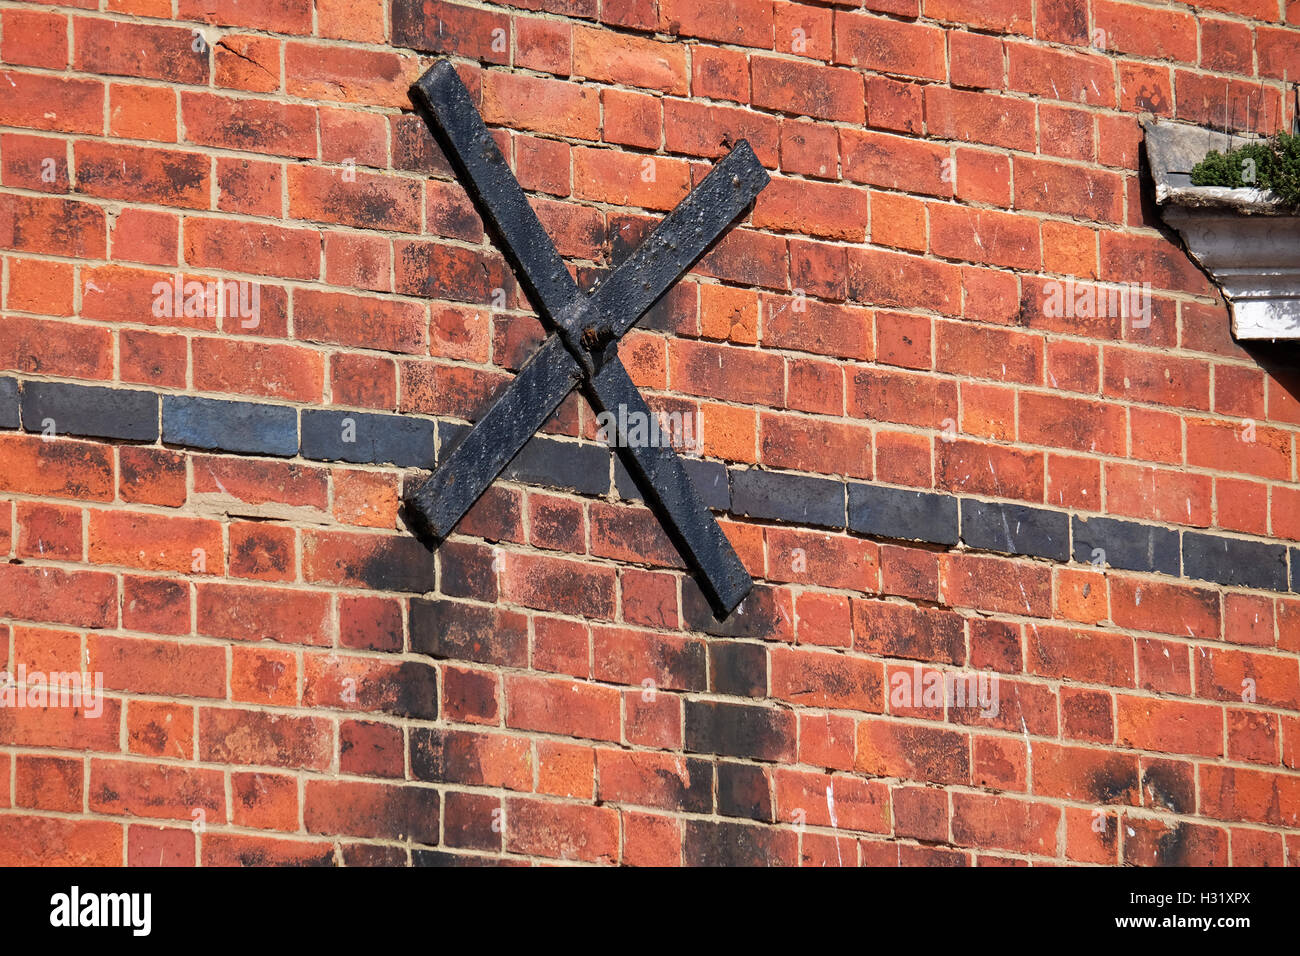 Steel cross on house wall with connecting bar through building to prevent wall bulge and collapse. Stock Photo